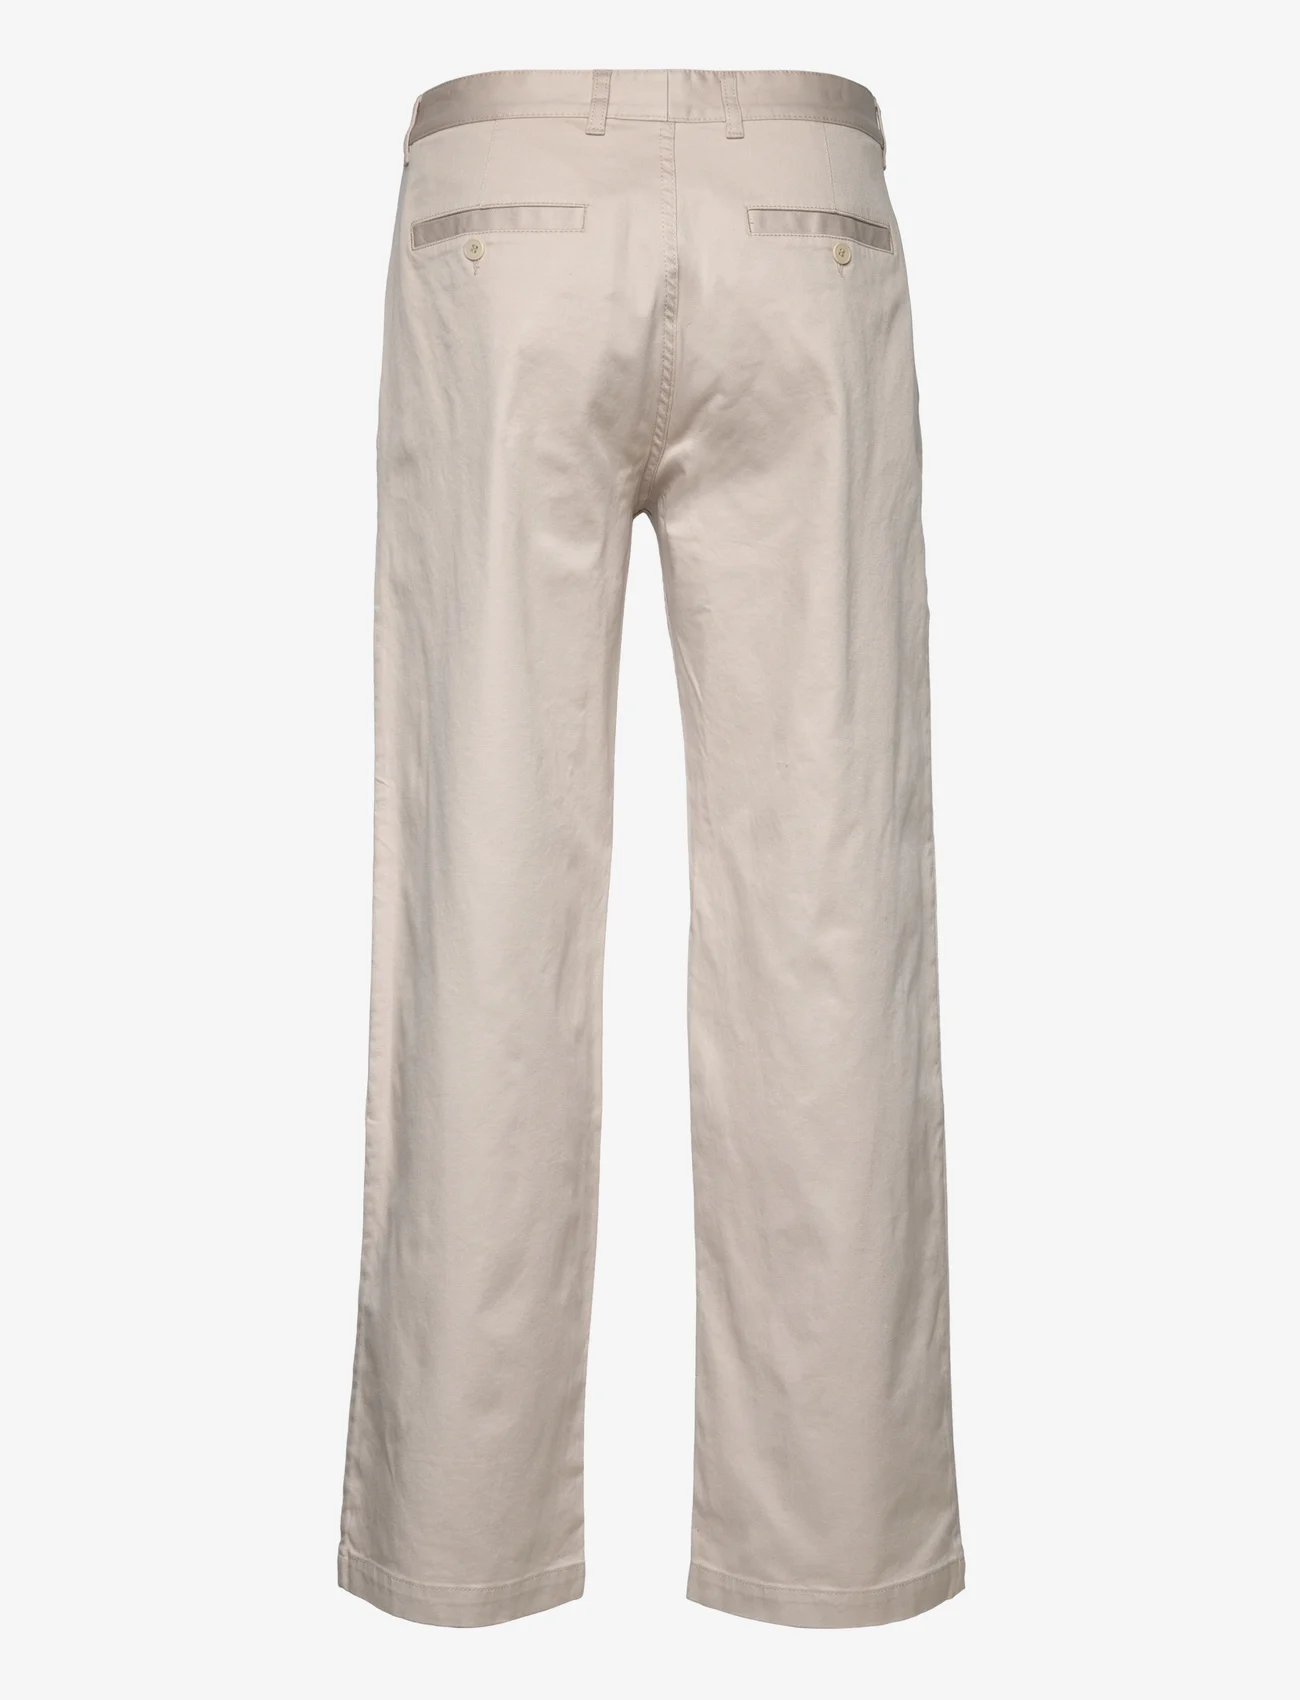 Wood Wood - Stefan classic trousers - chinos - light sand - 1